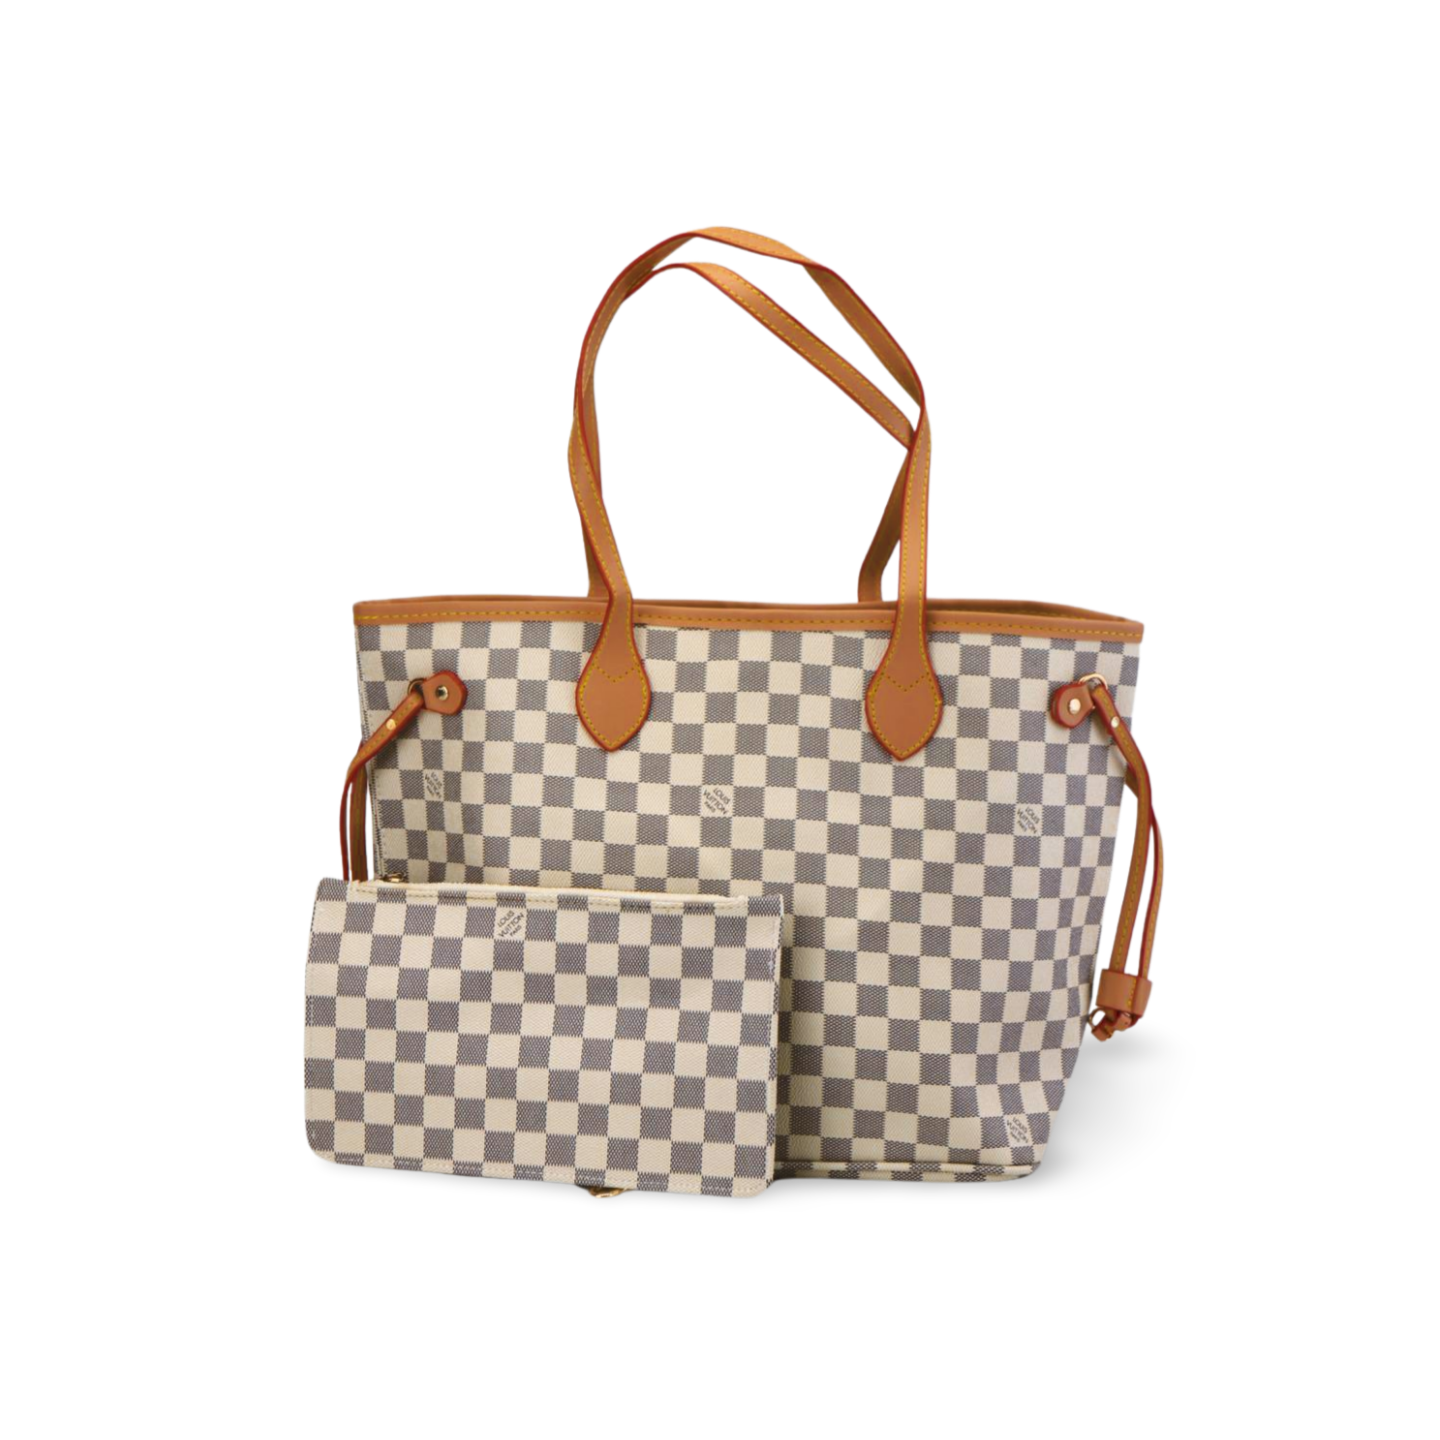 Buy online Lv On The Go Tote Bag In Pakistan, Rs 12500, Best Price